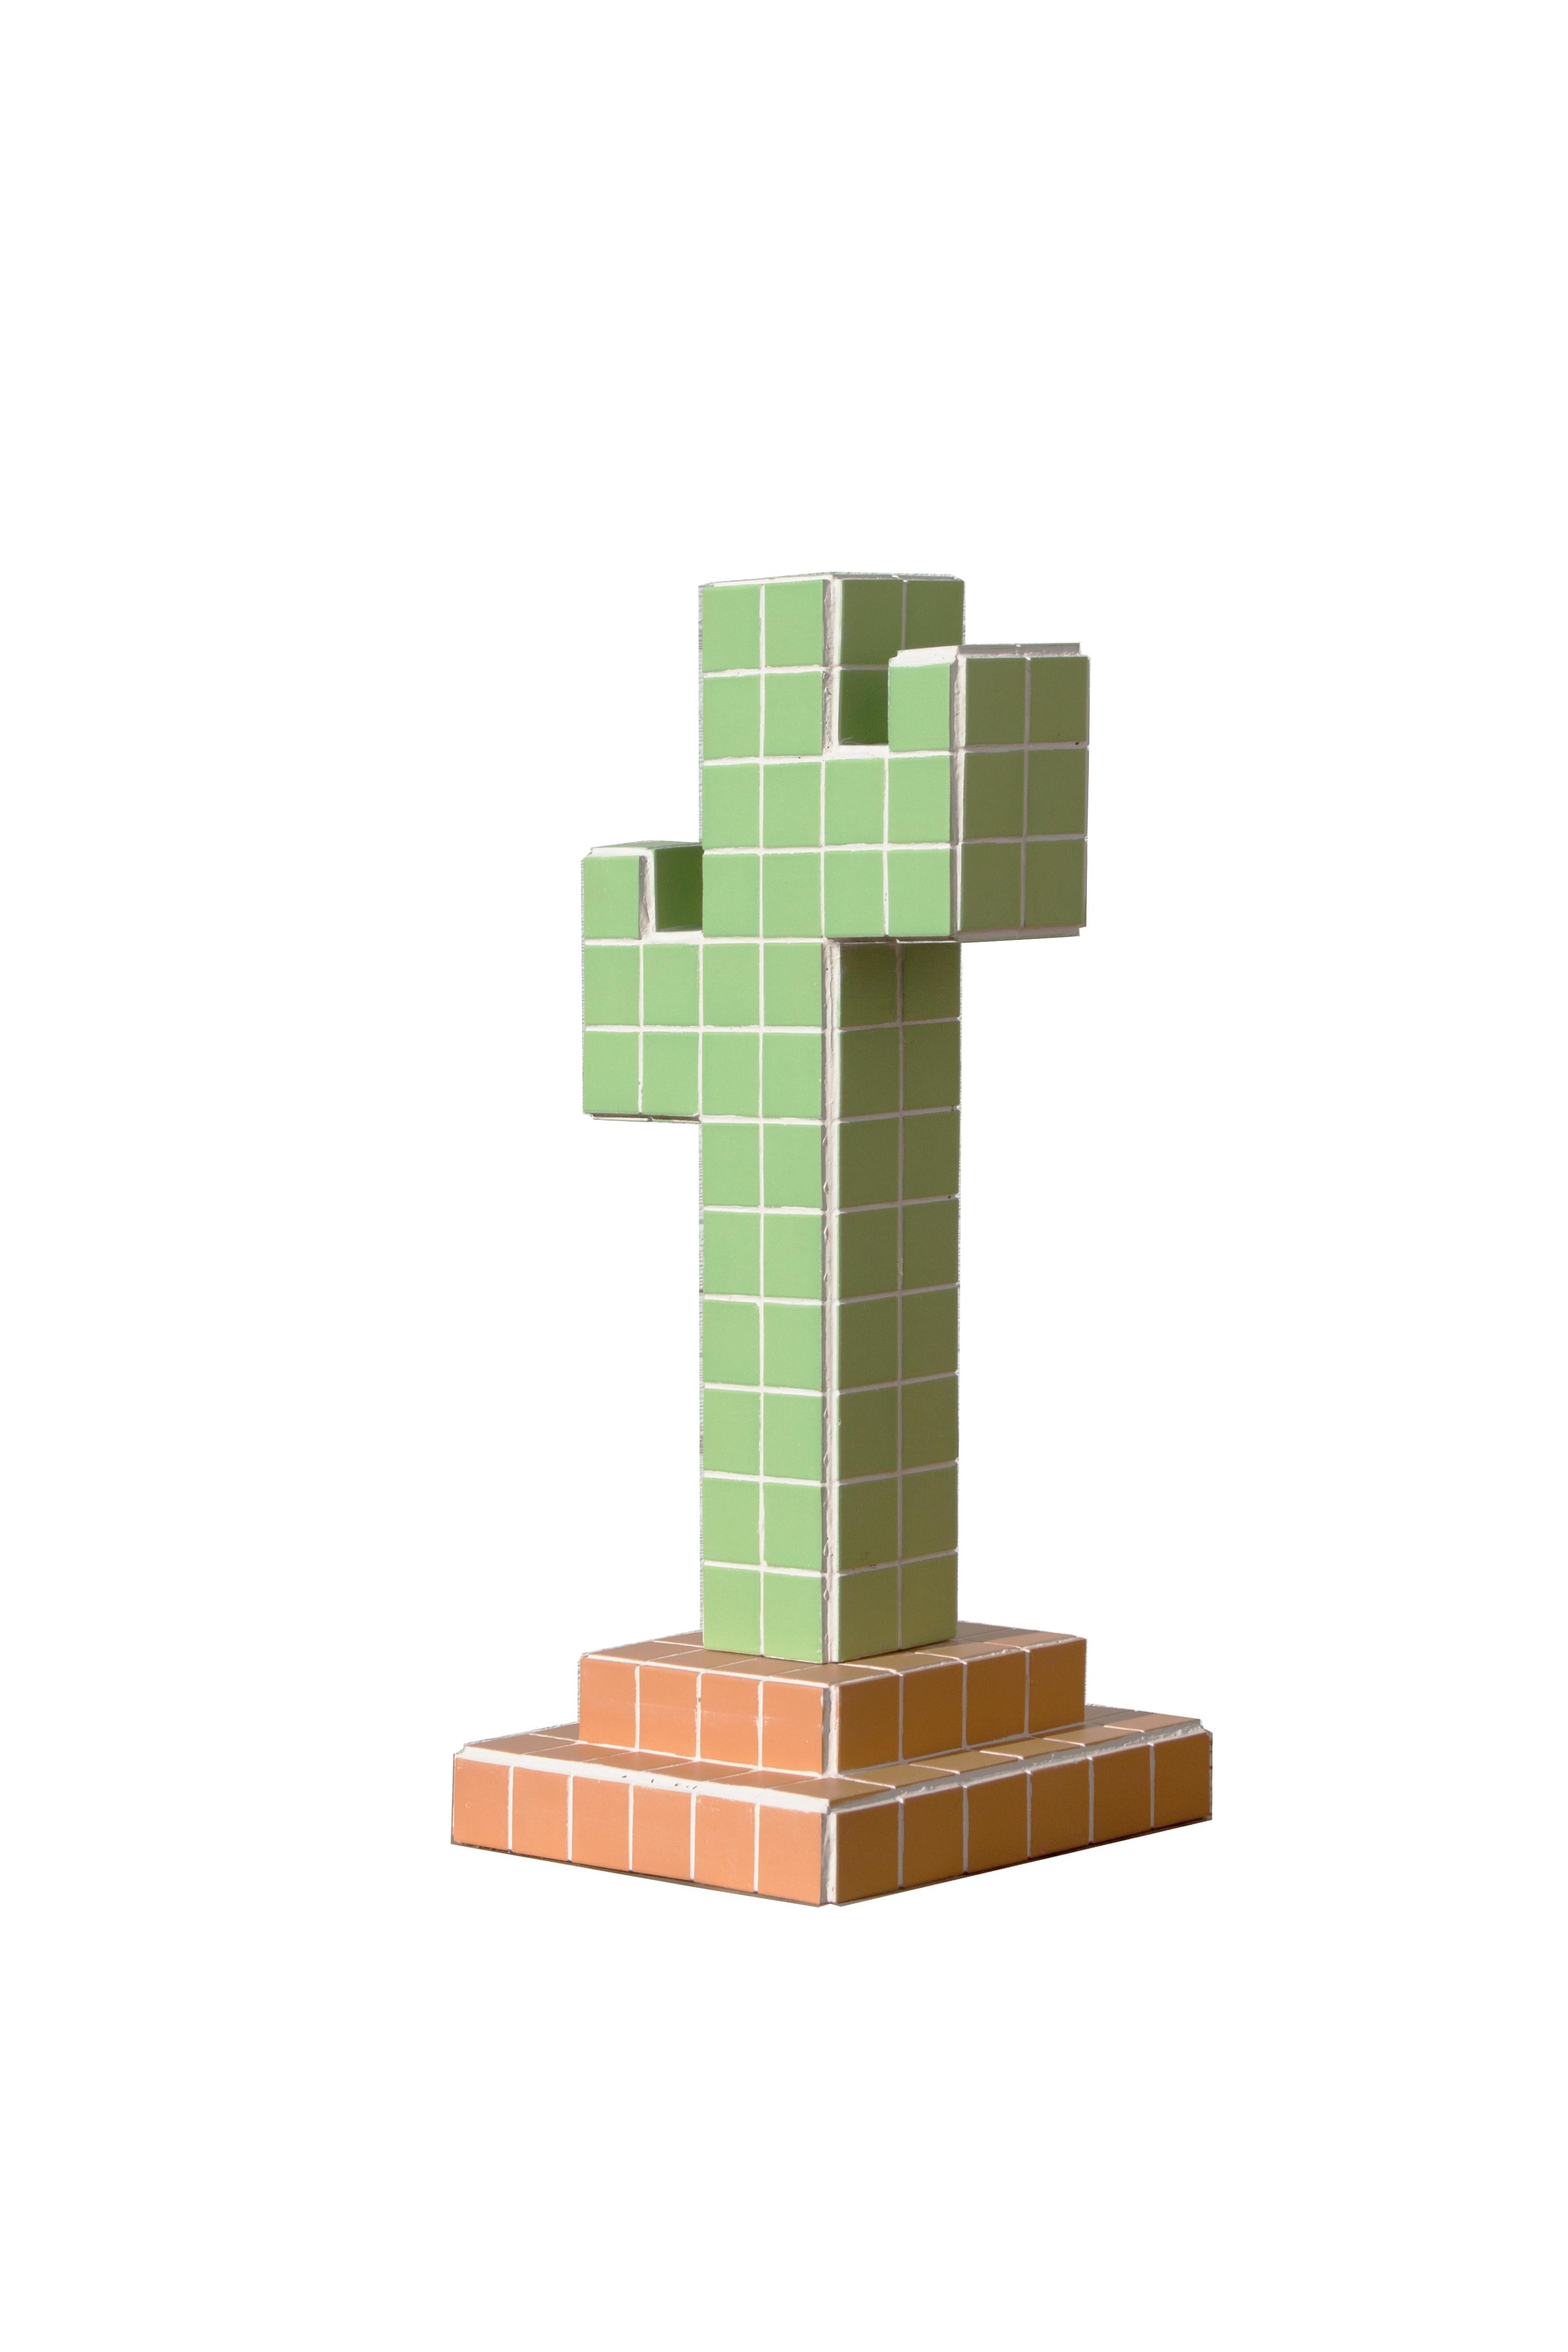 Designed and made by Nima Abili in Los Angeles this handcrafted cactus sculpture is cladded with green and terra-cotta matte porcelain tiles and sanded white grout. Inspired by Brutalist style of architecture this collection offers a variety of